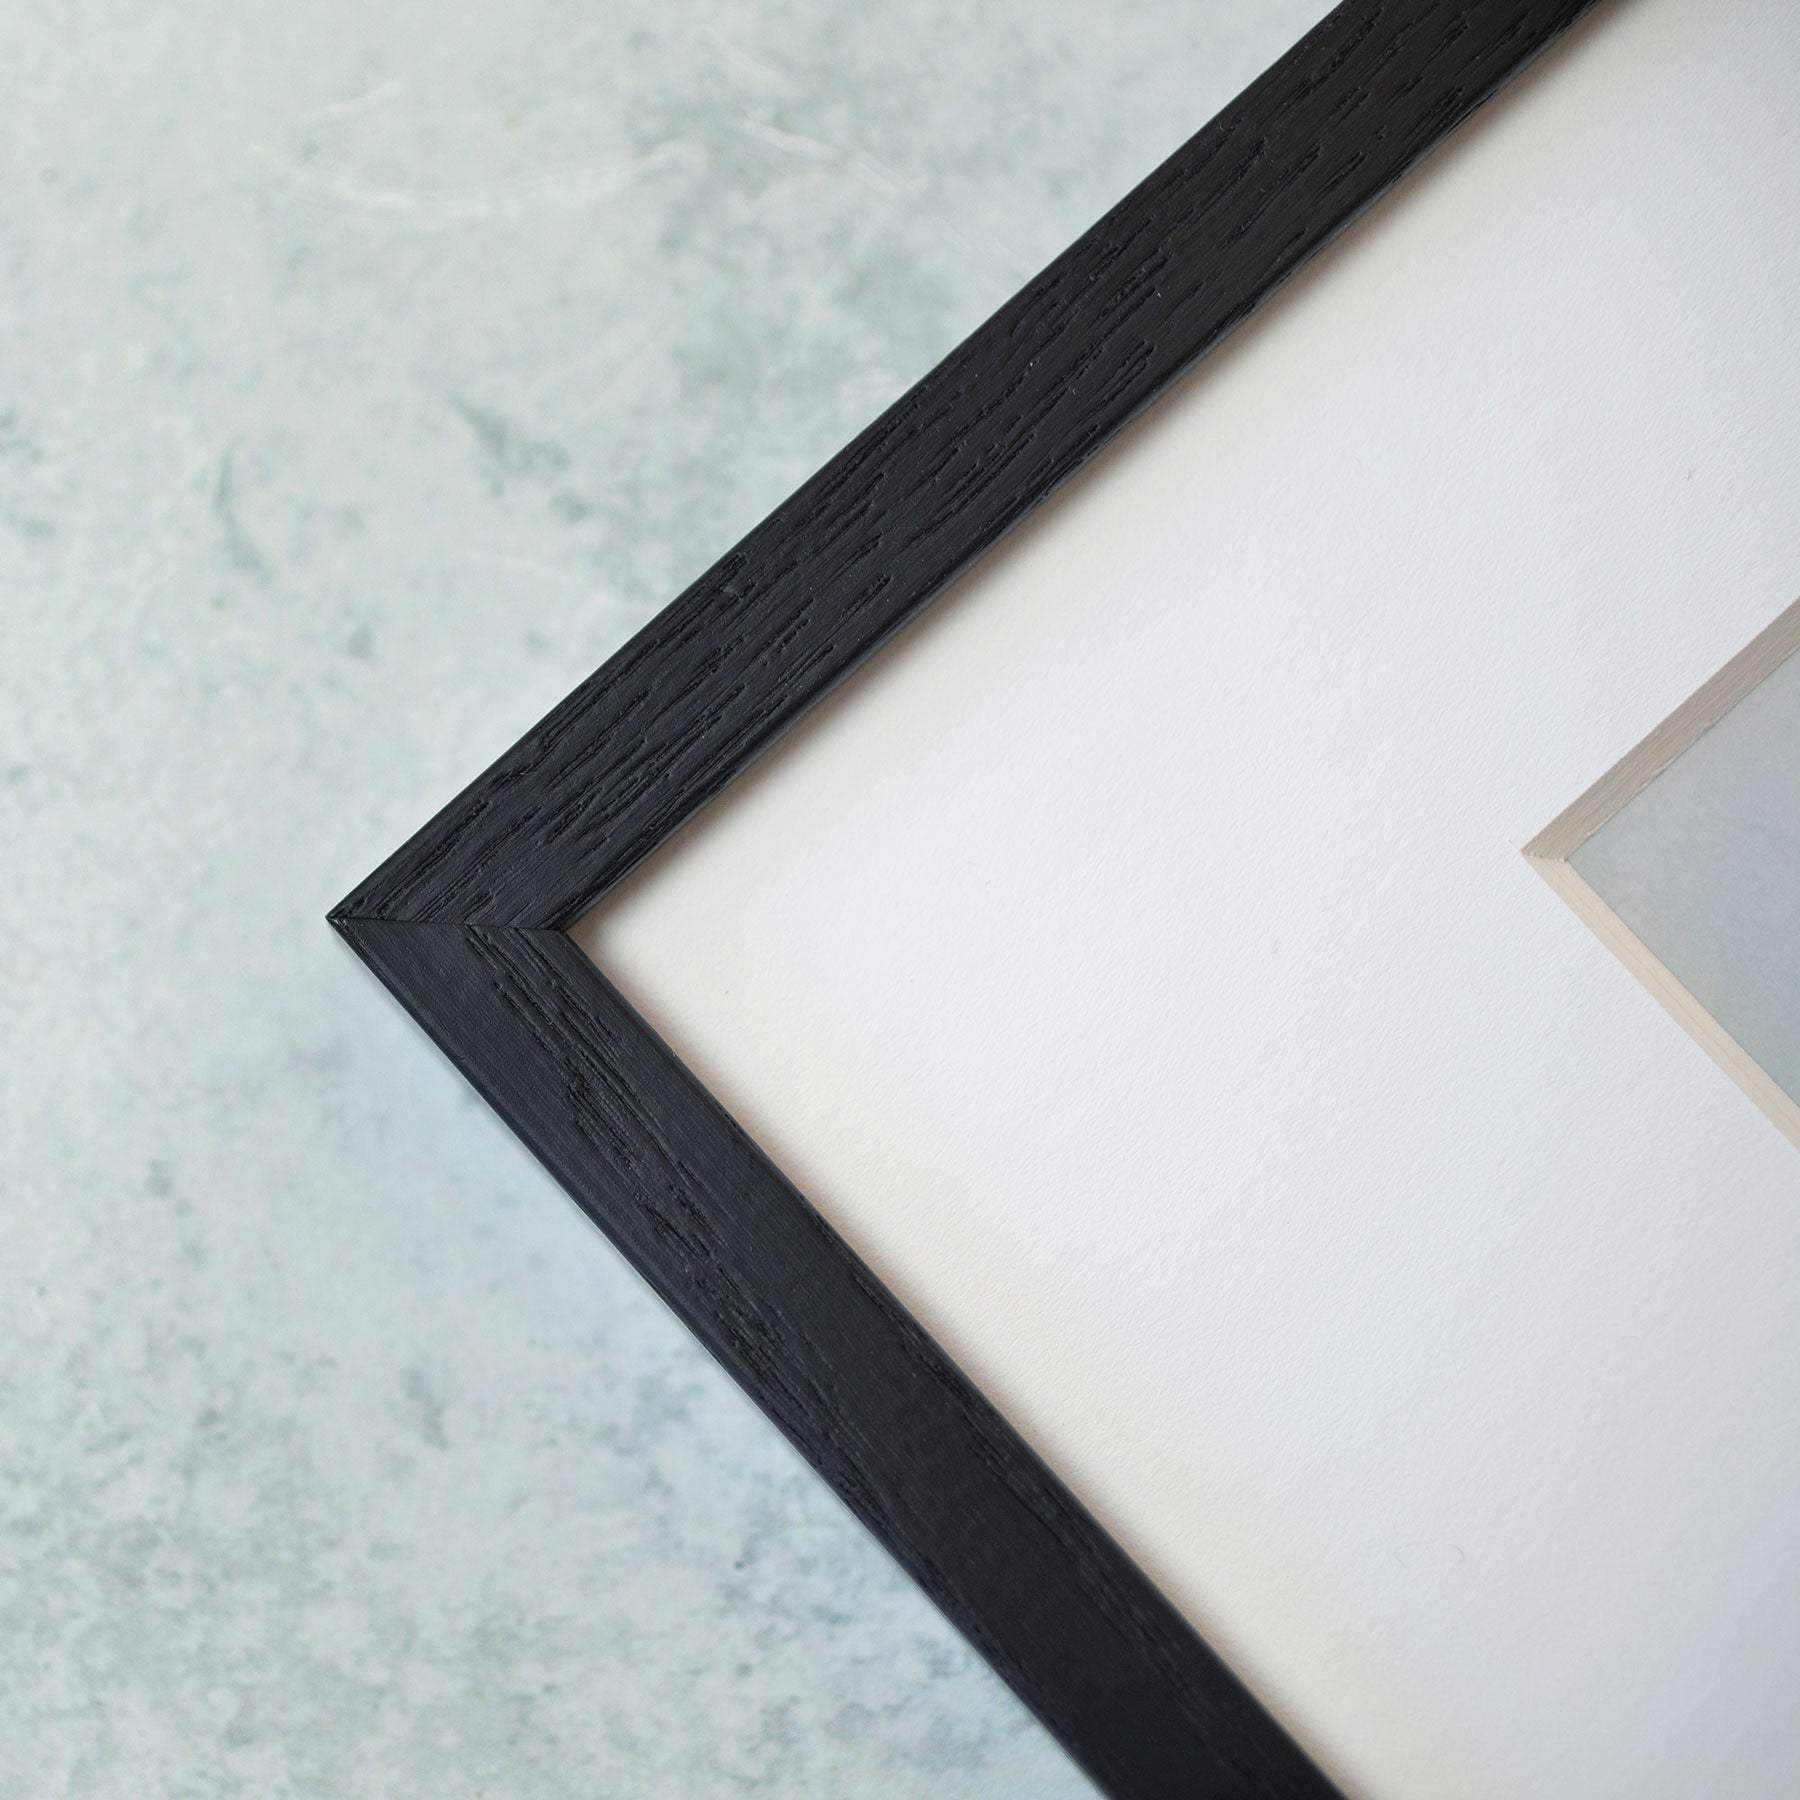 Close-up of a corner of a black textured &#39;Malibu Pier&#39; picture frame on a textured light blue background, partially enclosing an off-white canvas with coastal decor.